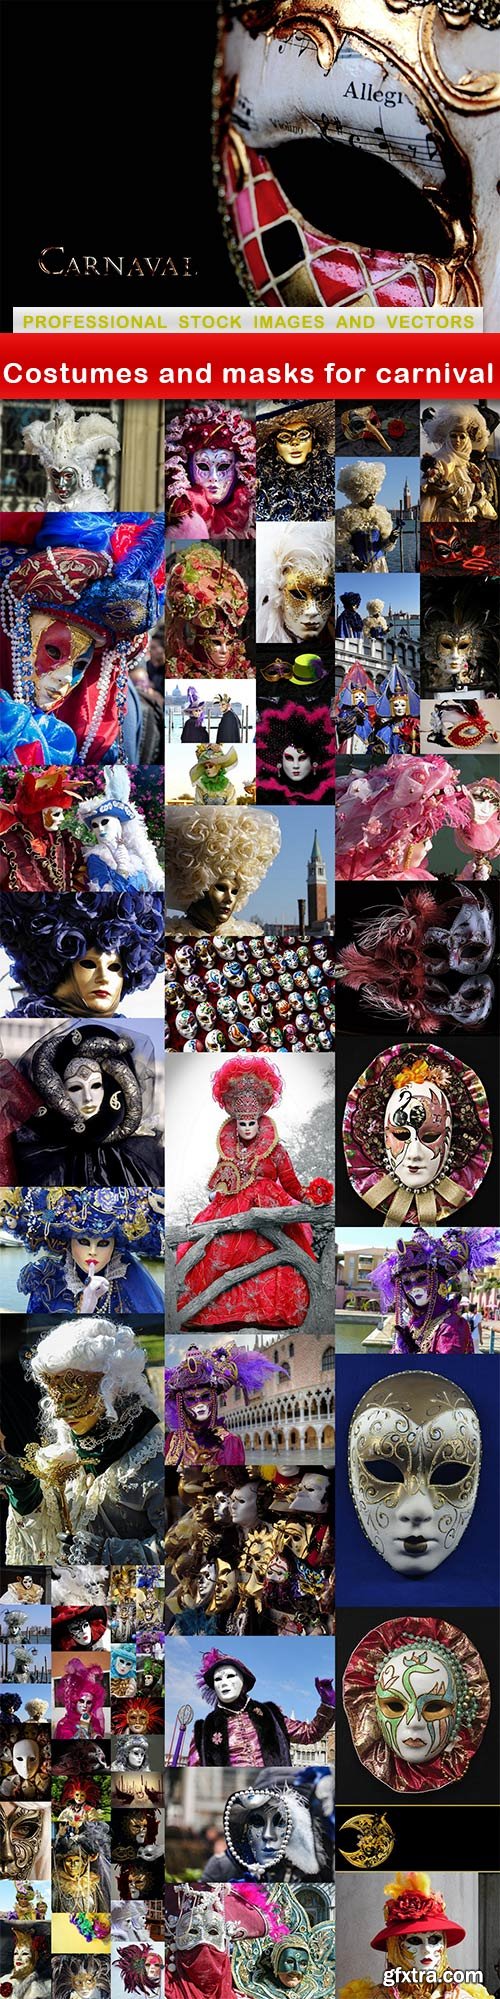 Costumes and masks for carnival - 73 UHQ JPEG